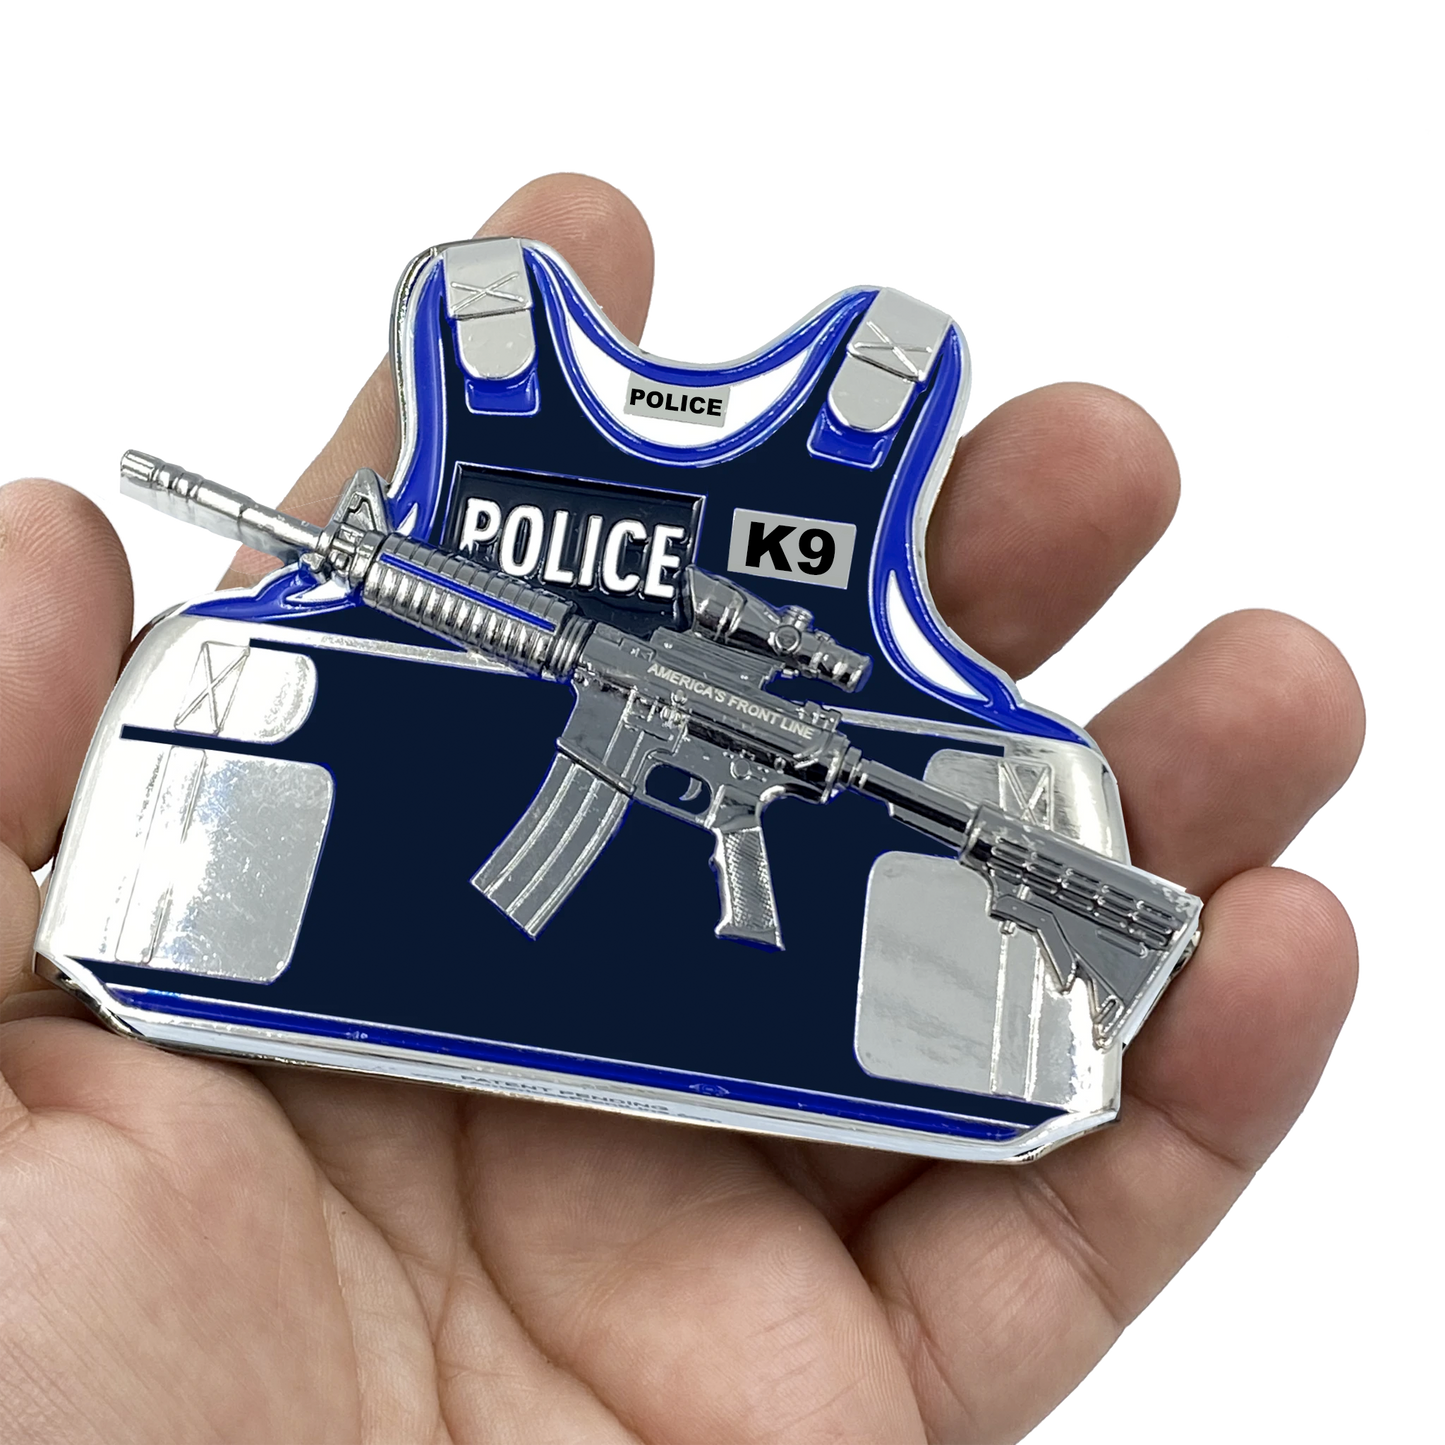 BL16-017 K9 POLICE CANINE OFFICER M4 Body Armor 3D self standing Police Department Challenge Coin thin blue line